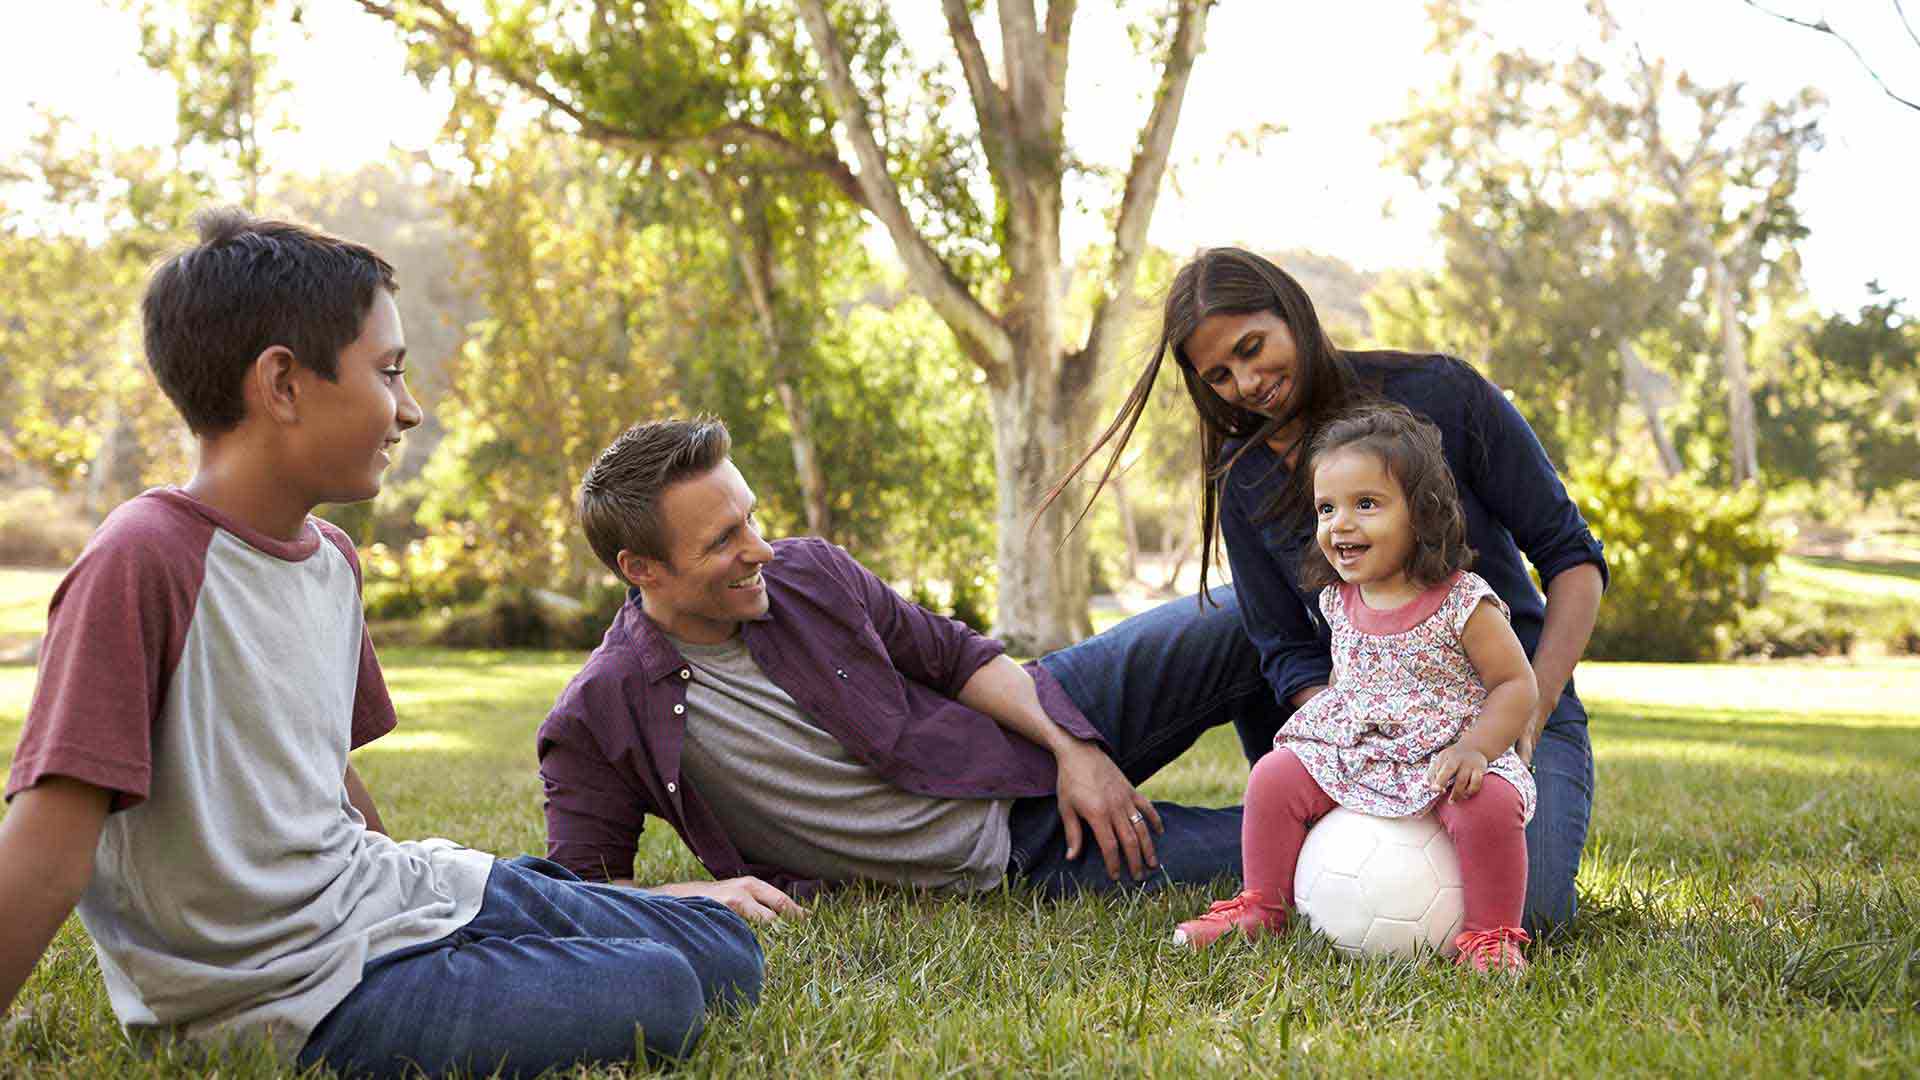 A family of four sits on the grass, the youngest child sits on a ball and smiles at her brother.